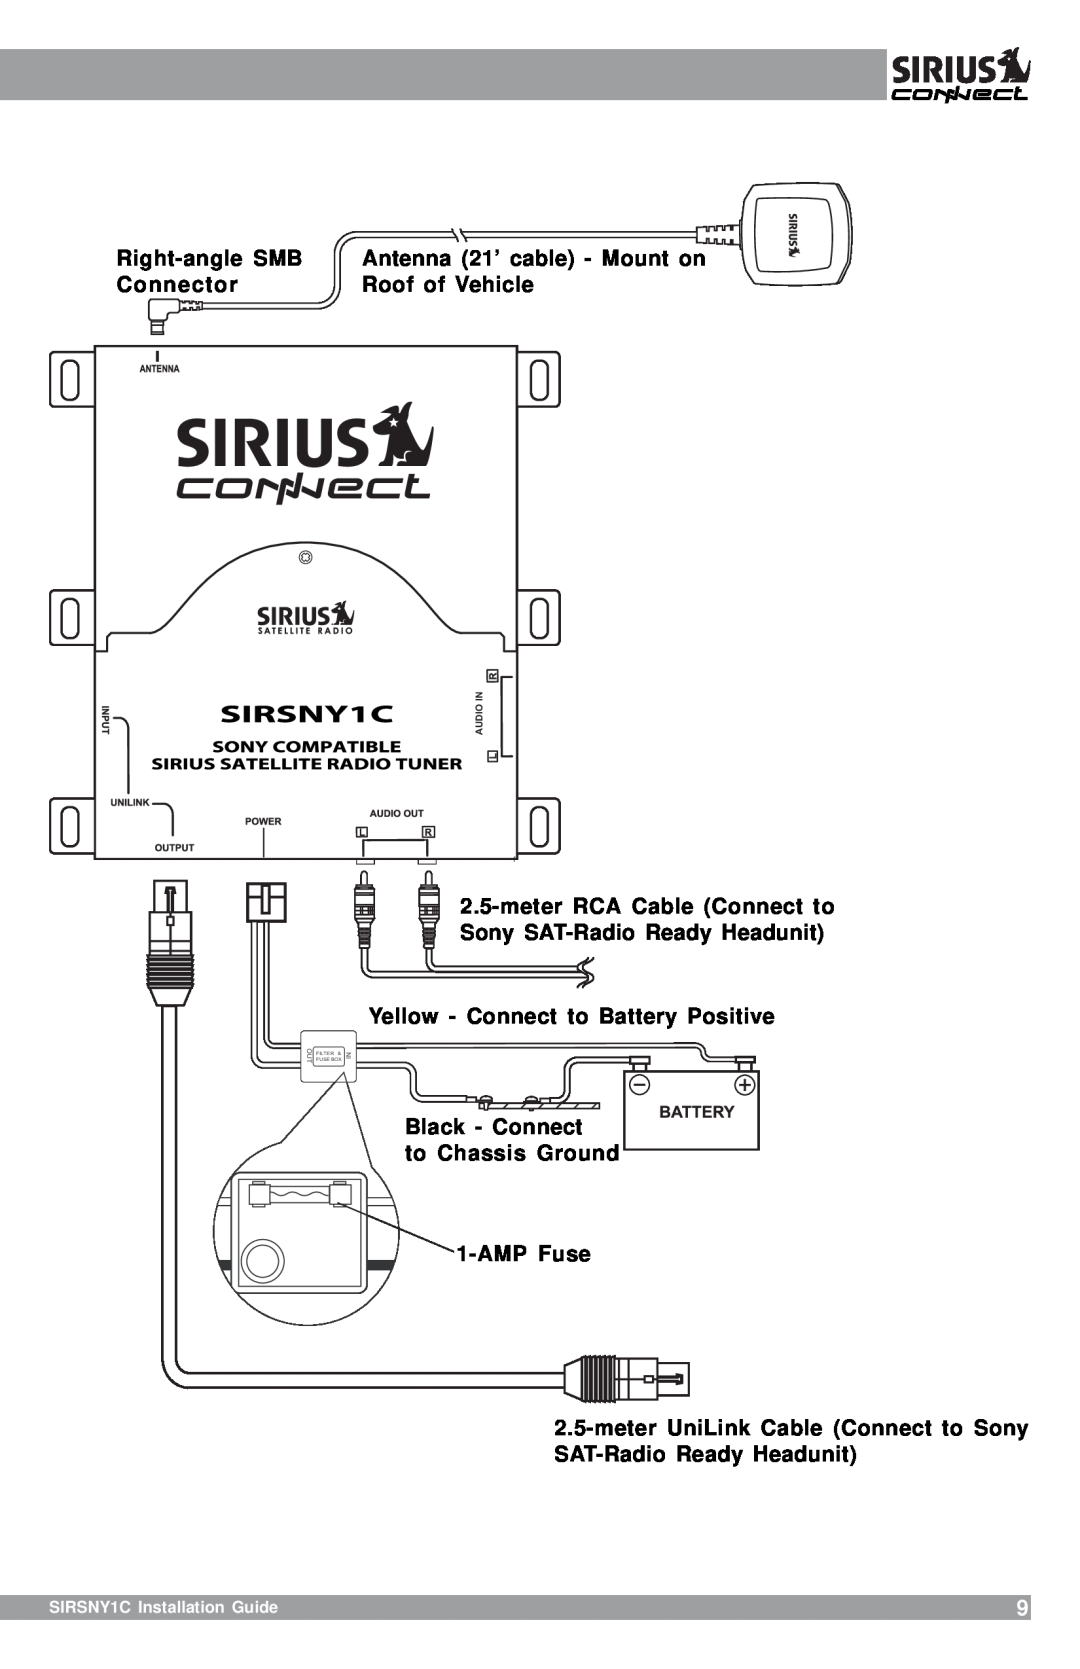 Sirius Satellite Radio SIRSNY1C Right-angle SMB, Antenna 21’ cable - Mount on, Connector, Roof of Vehicle, AMP Fuse, Audi 